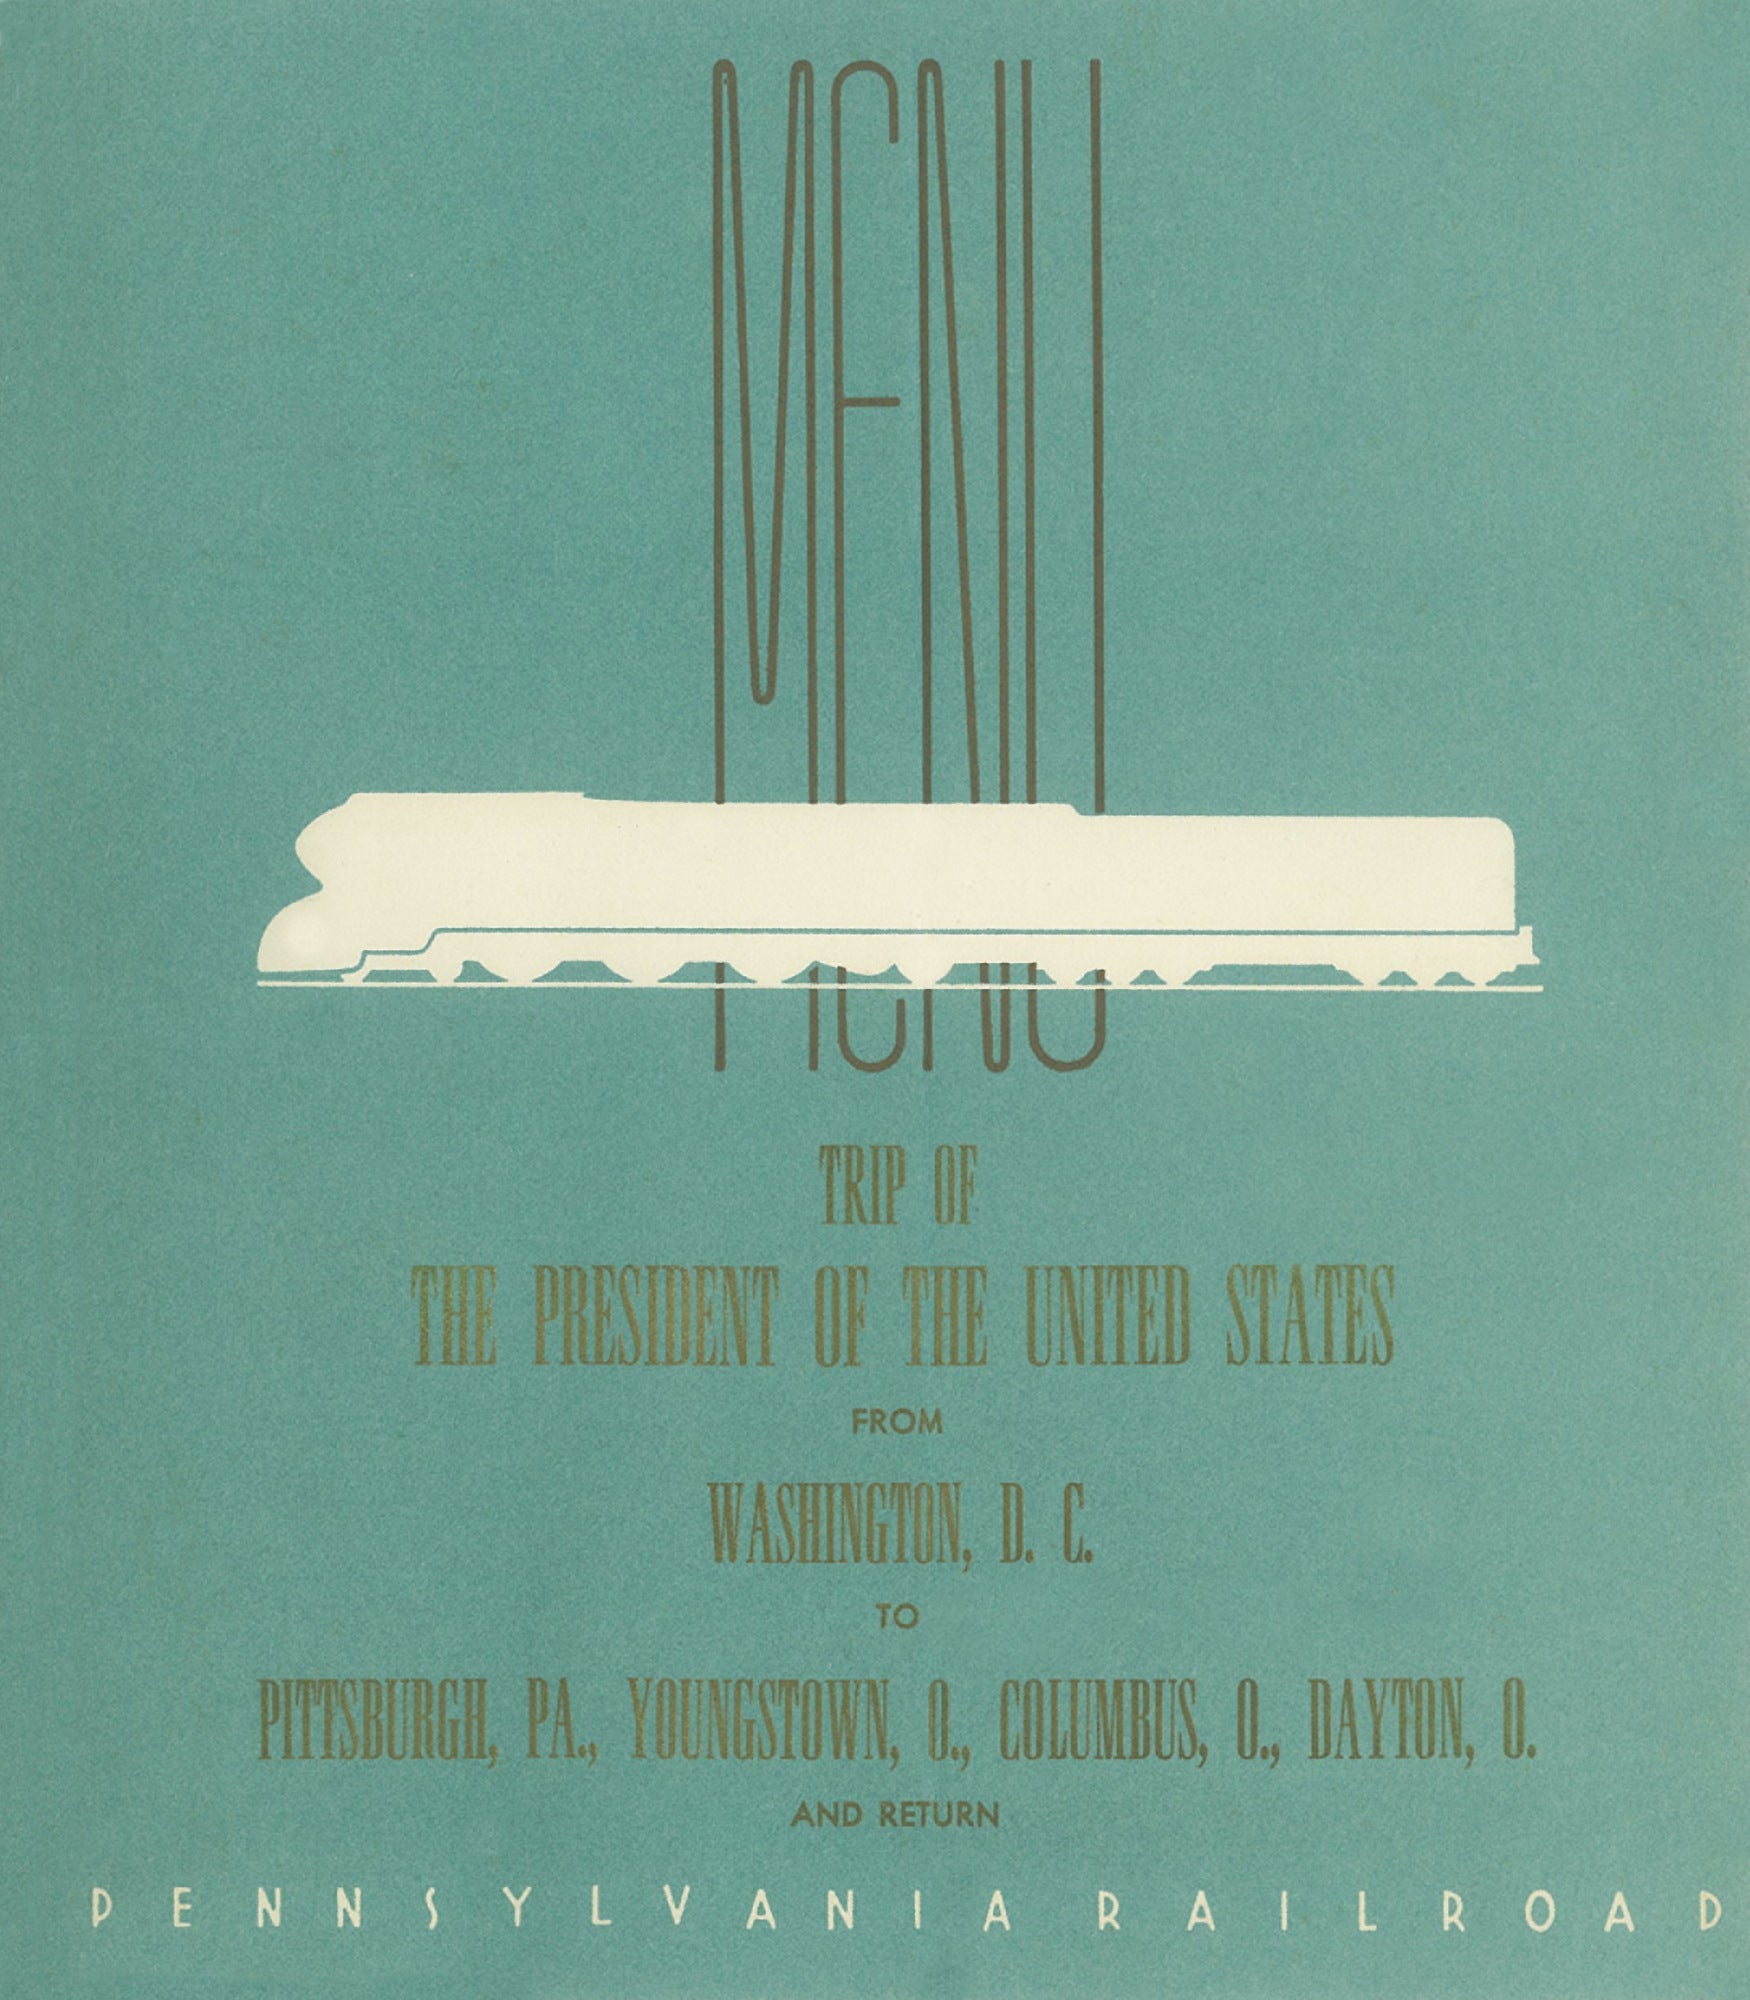 Trip Of The President Of The United States from Washington D.C., October 1940 Menu Art